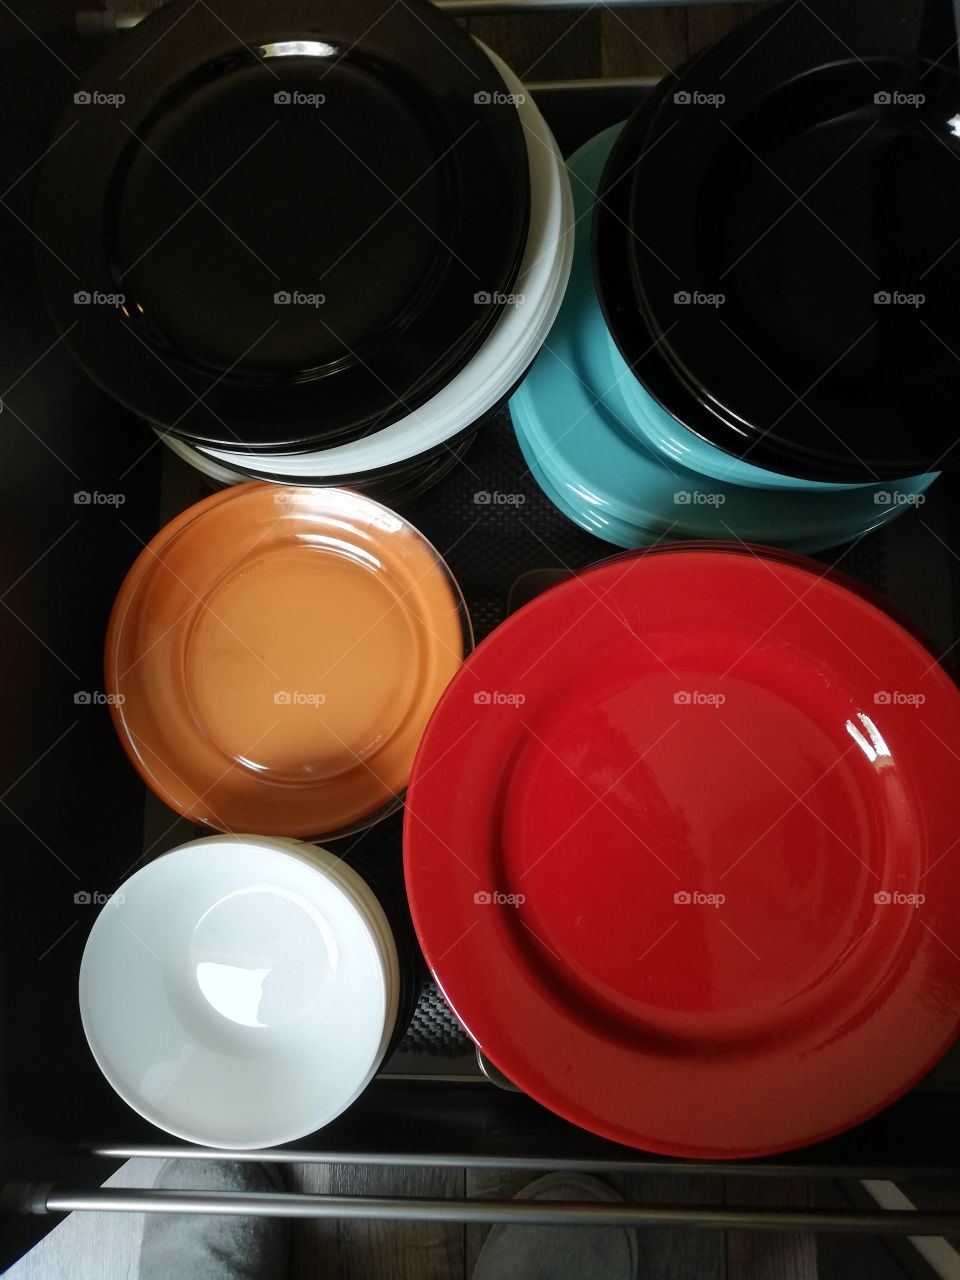 The plates in many colours and sizes are one on the other inside the cupboard, which walls are stuck with the parts of grey plastic and silver color metallic holders. The shoes are seen on the floor.